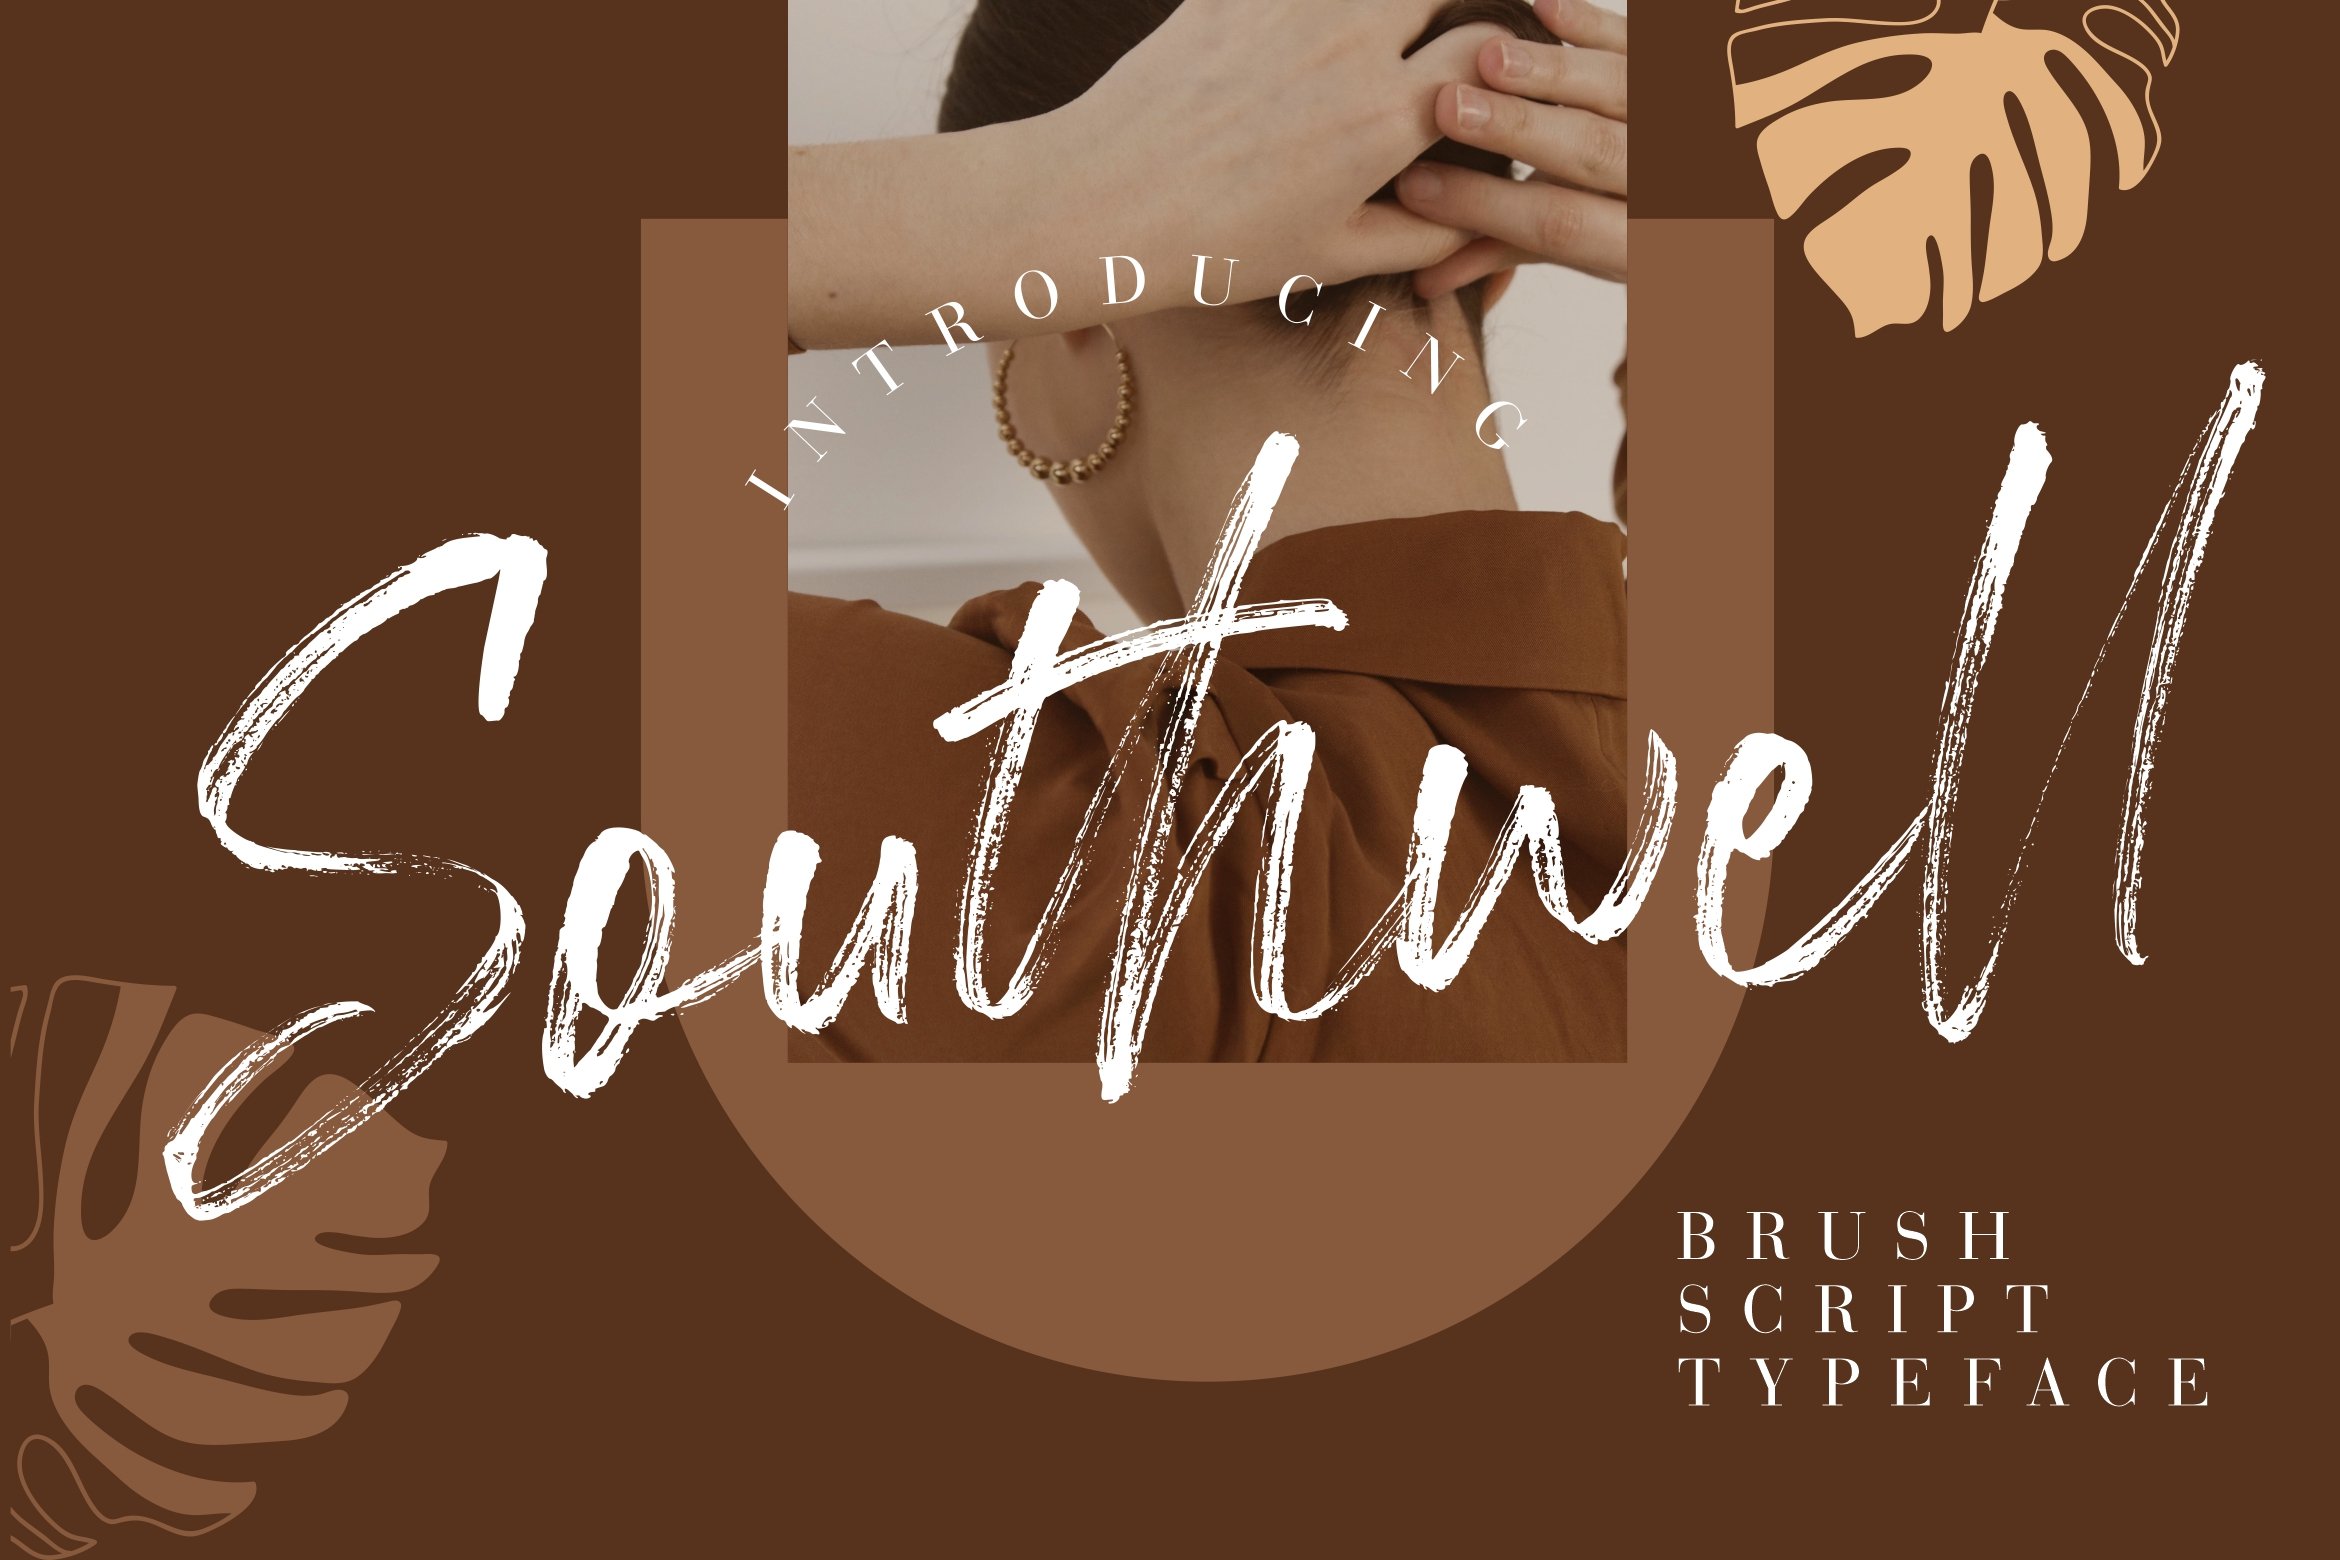 Brown illustration with the brush font.